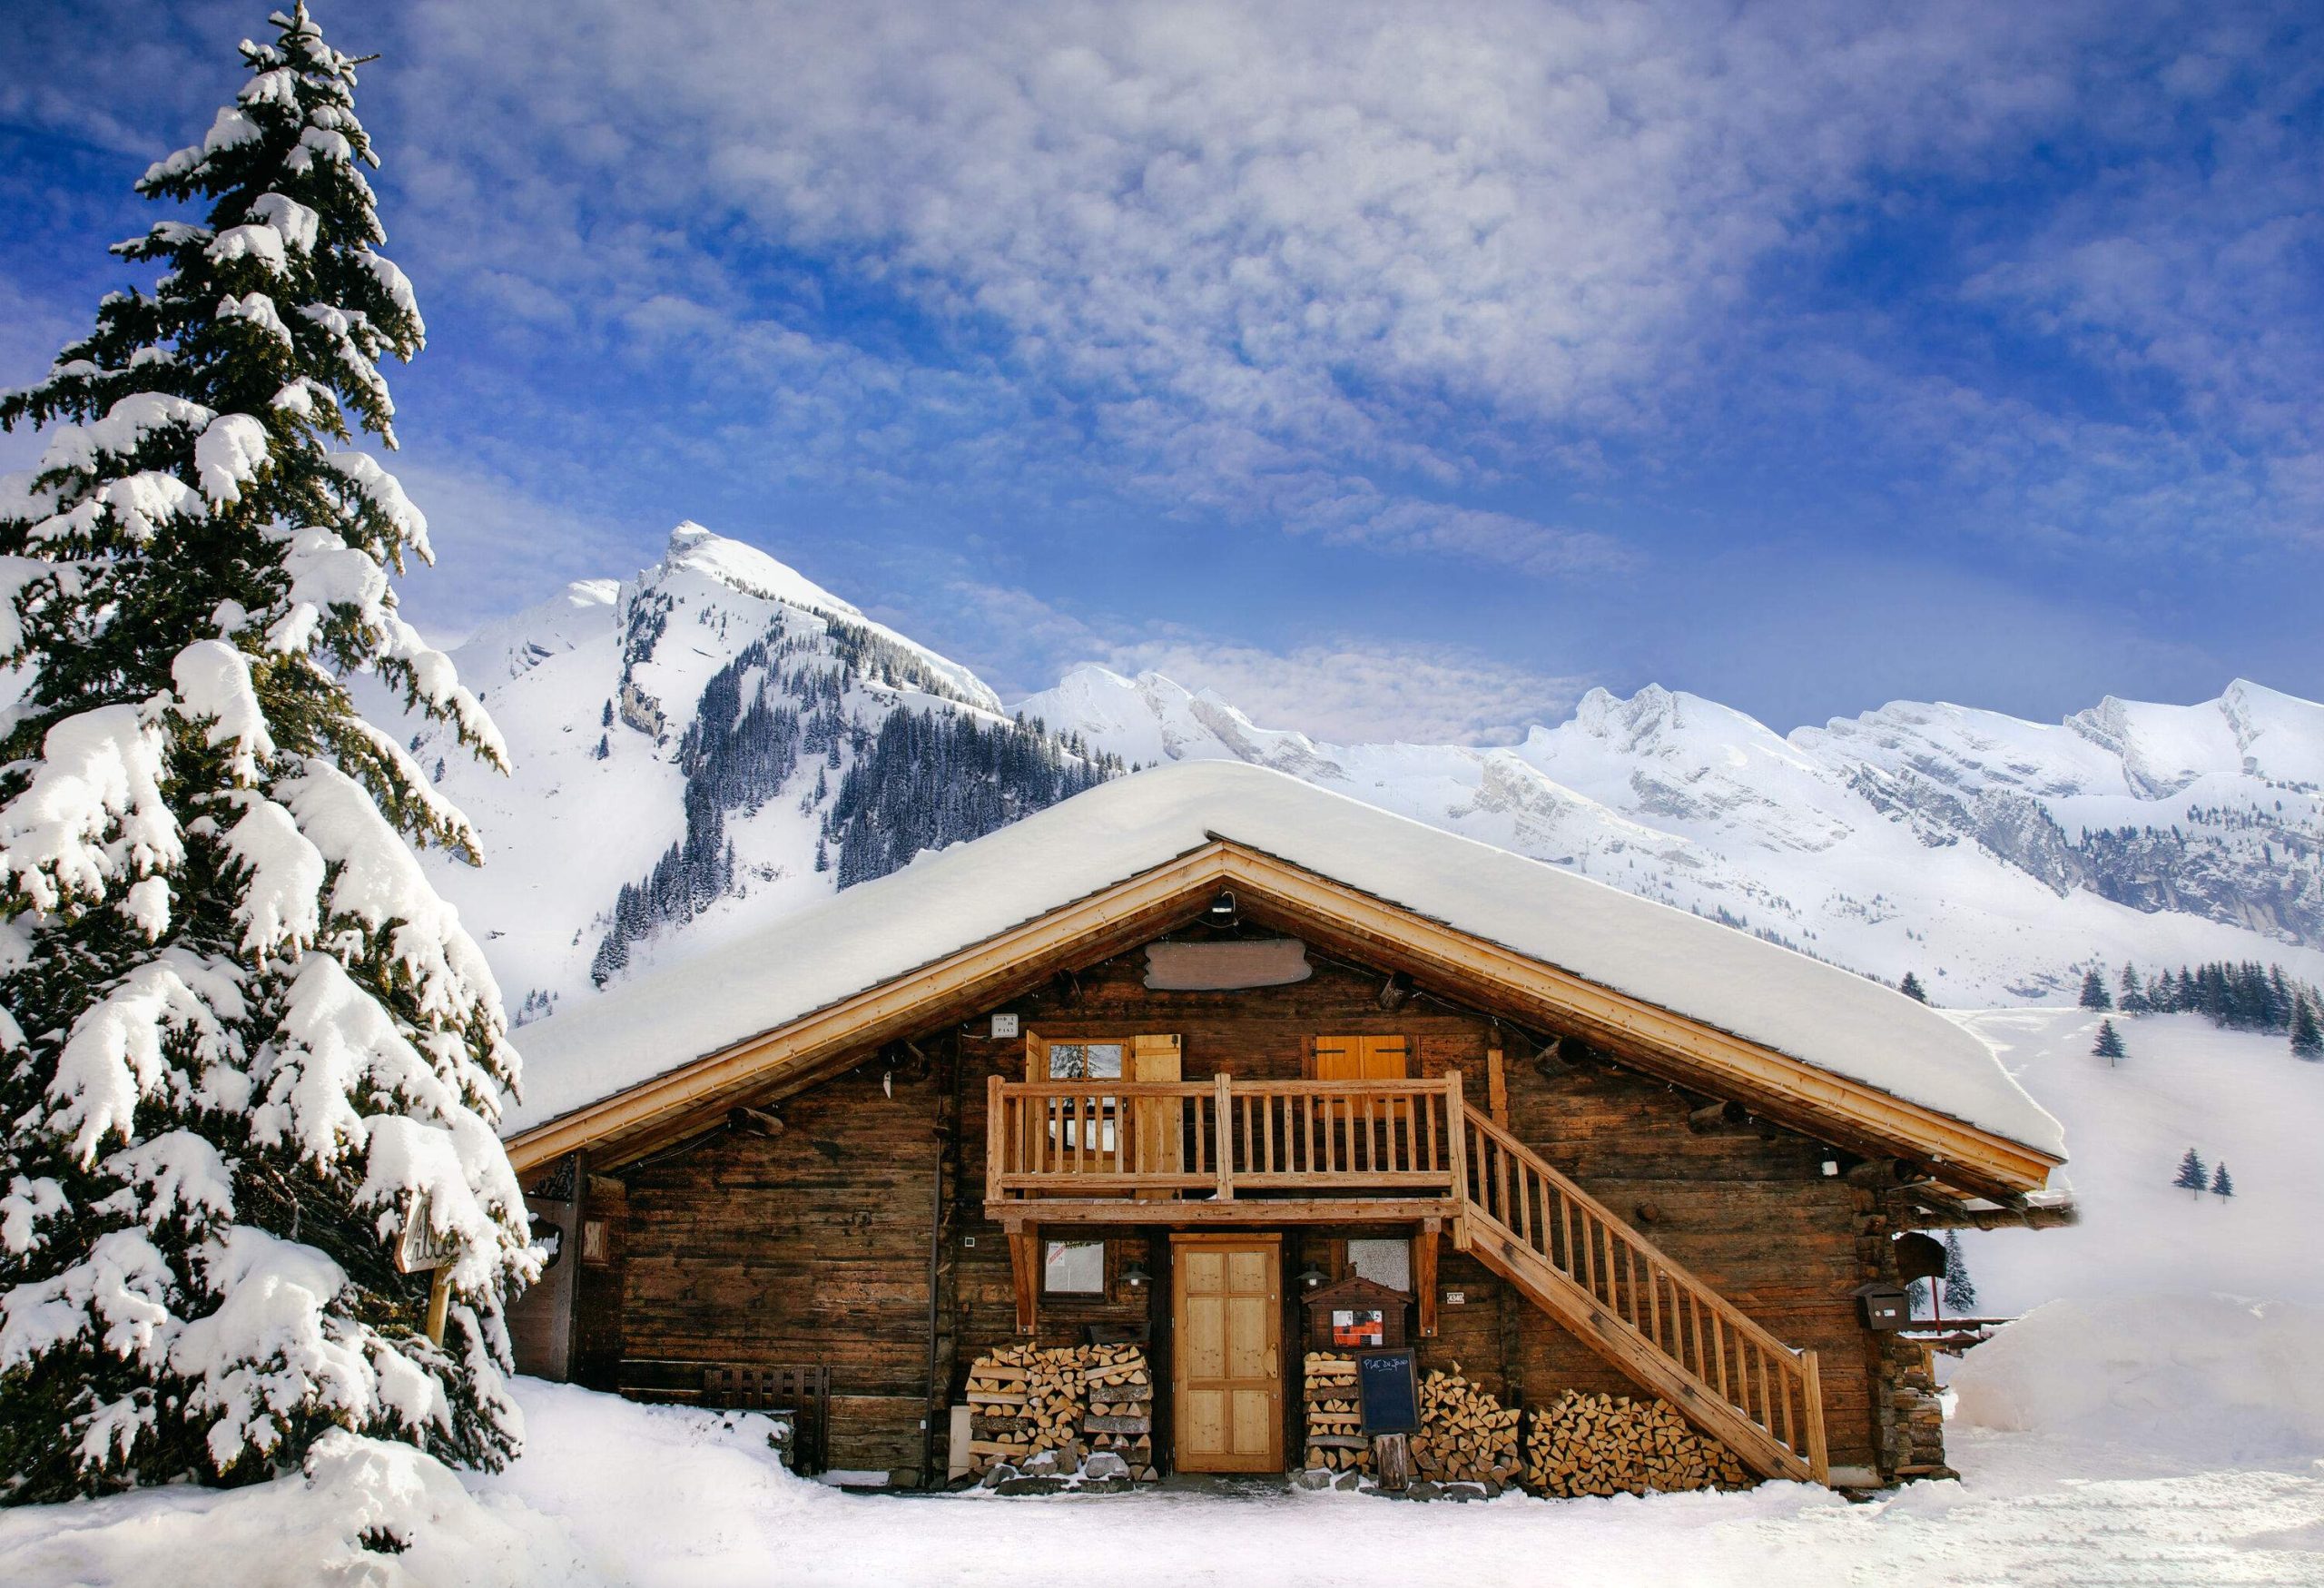 A wooden cabin with a roof covered in a thick layer of snow set in the mountains.